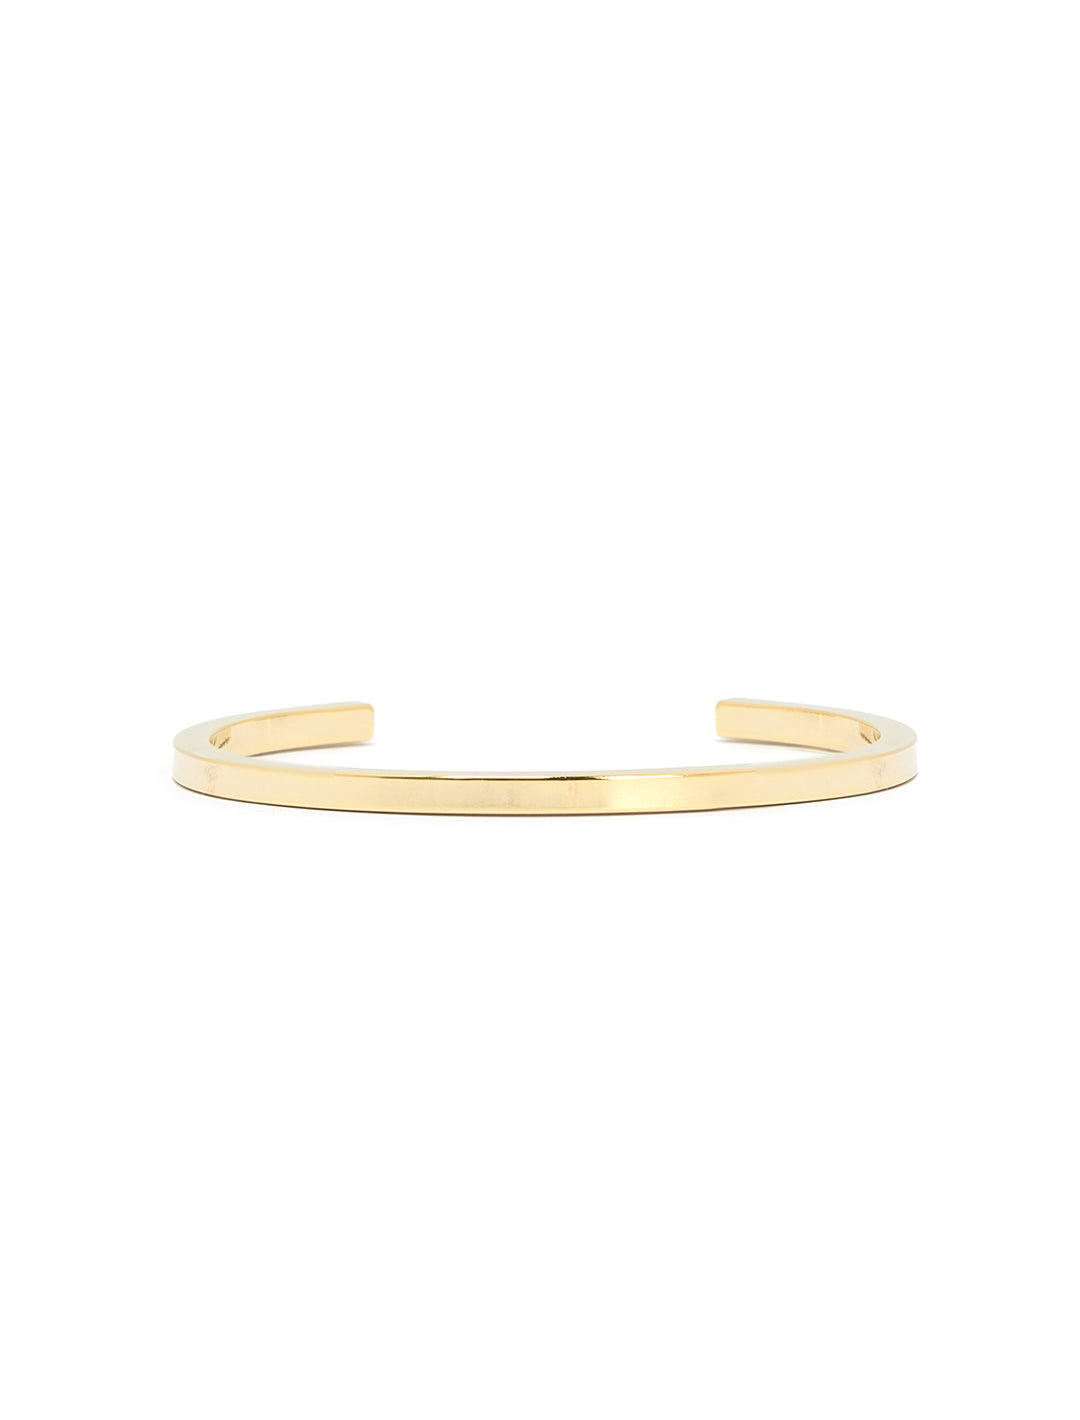 Front view of AV Max gold squared edge cuff